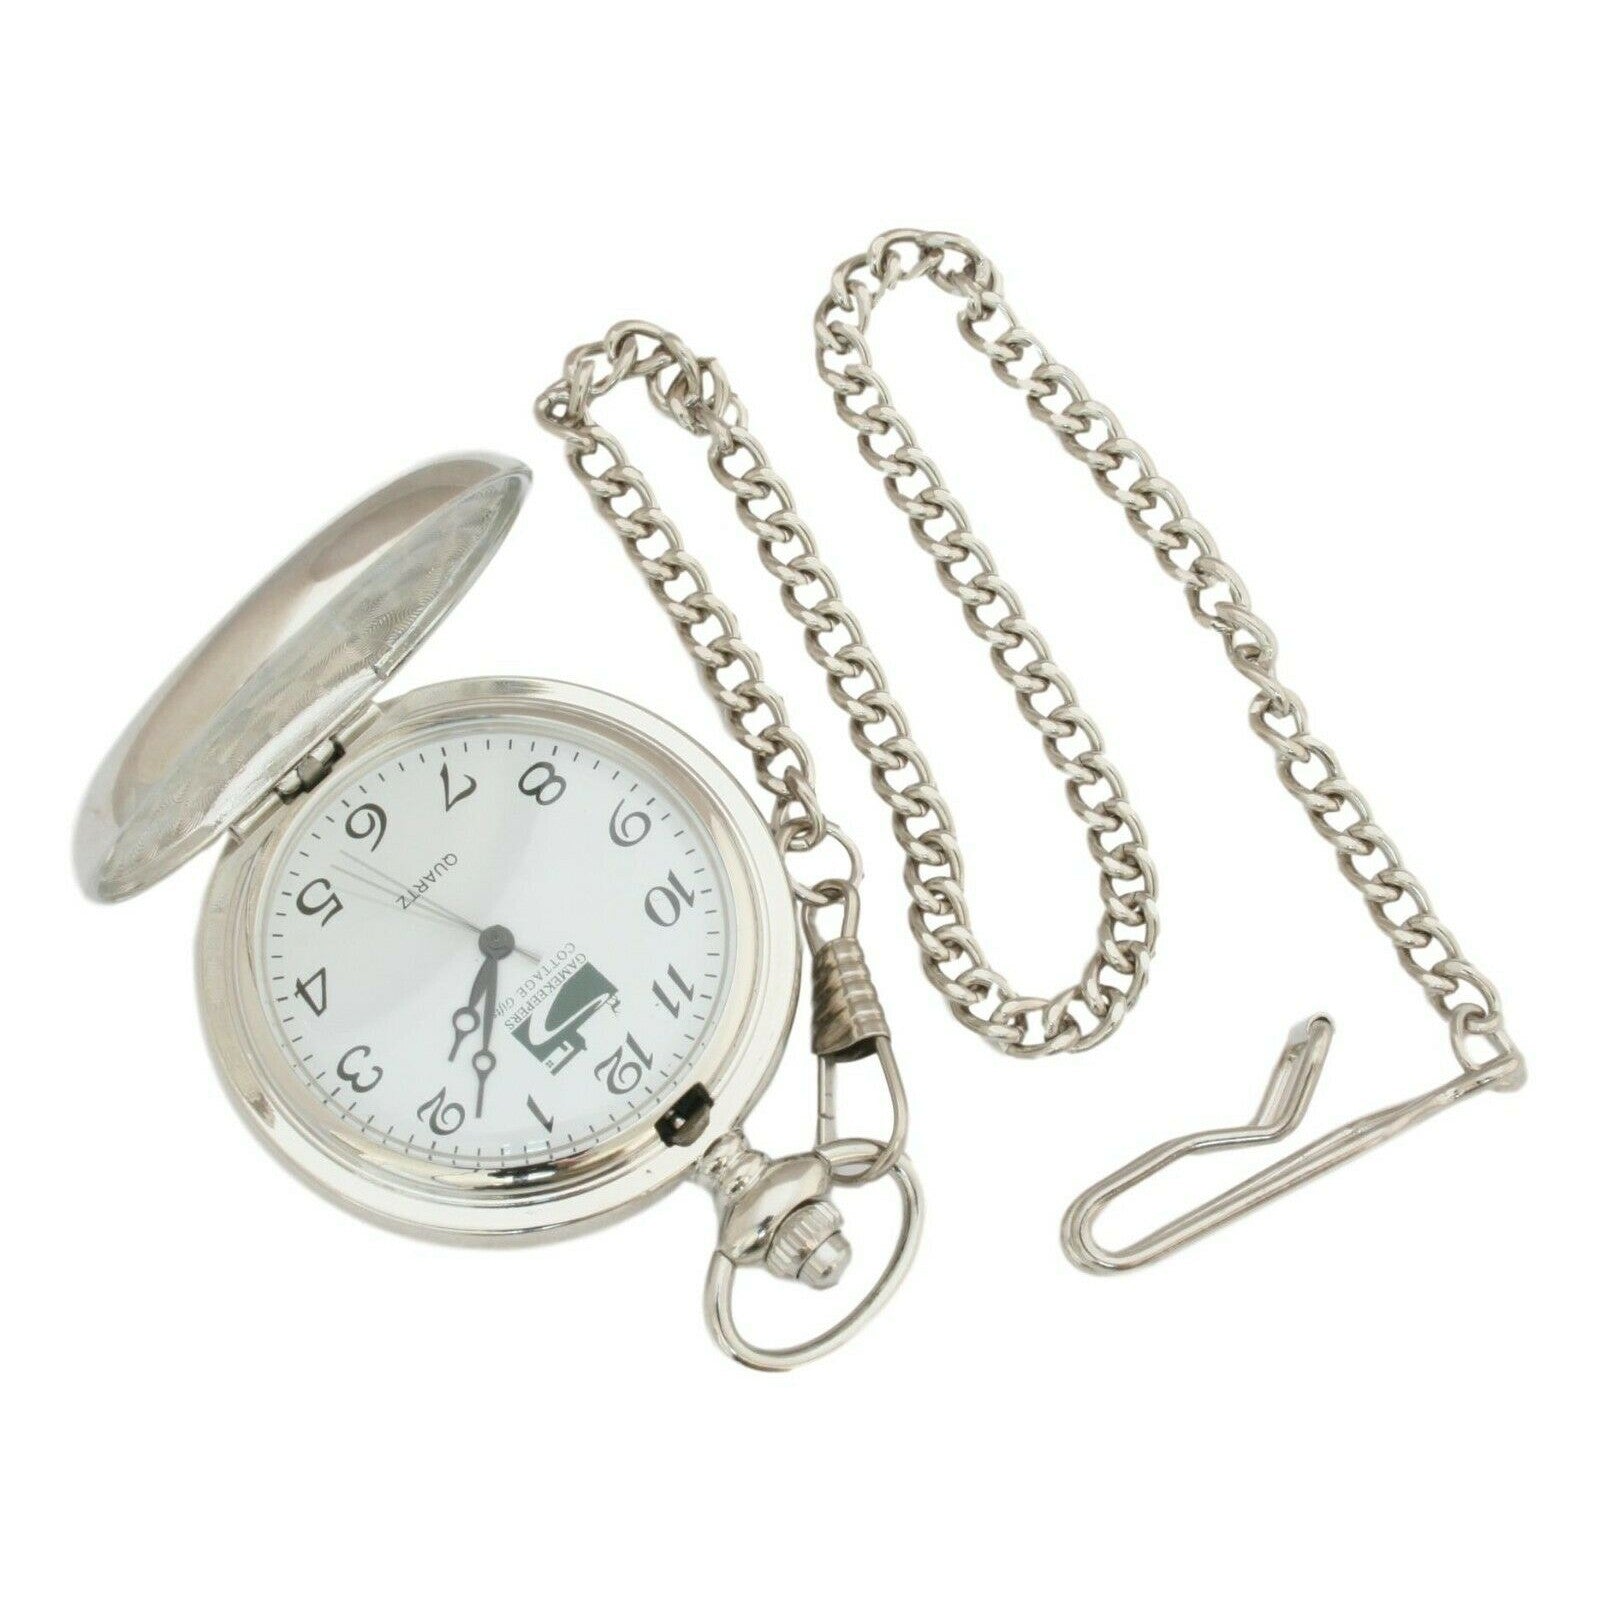 Sold at Auction: Waltham - a Sportsman's Stag full hunter pocket watch,